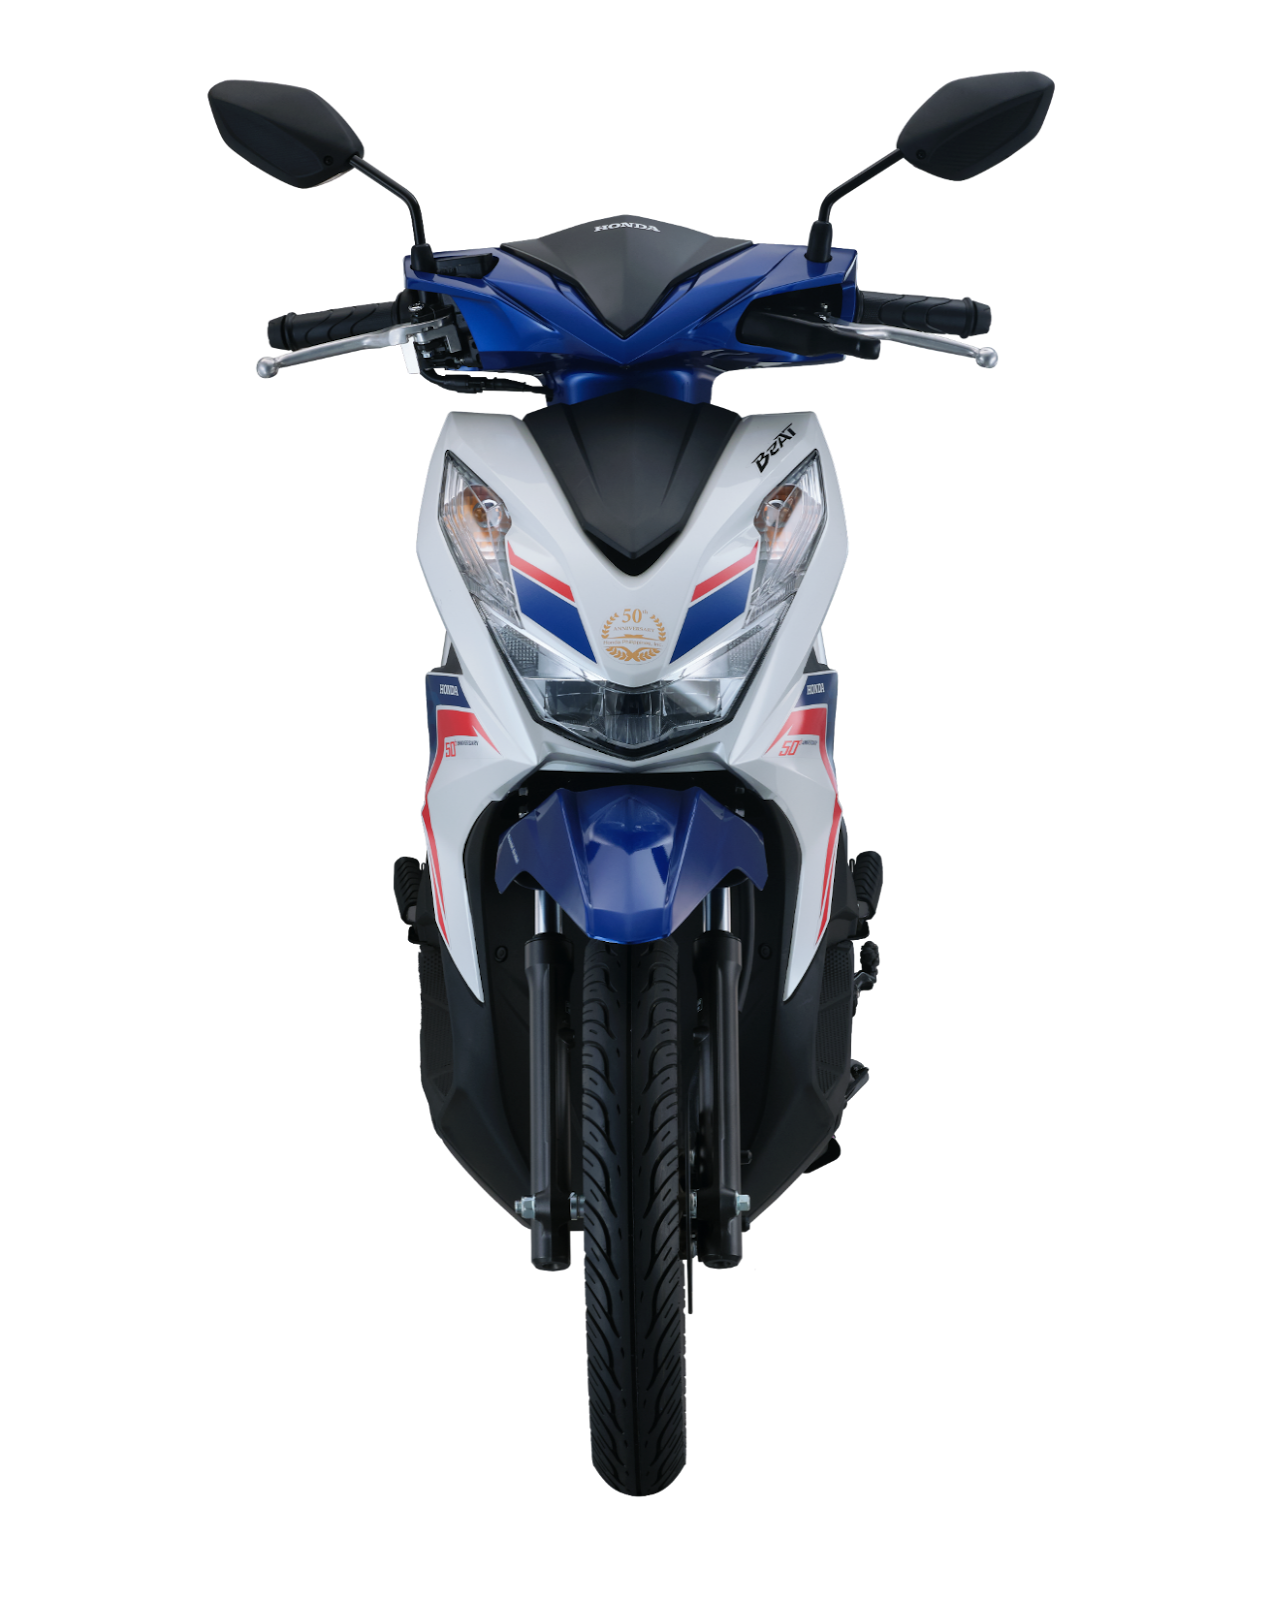 A white and blue motorcycle

Description automatically generated